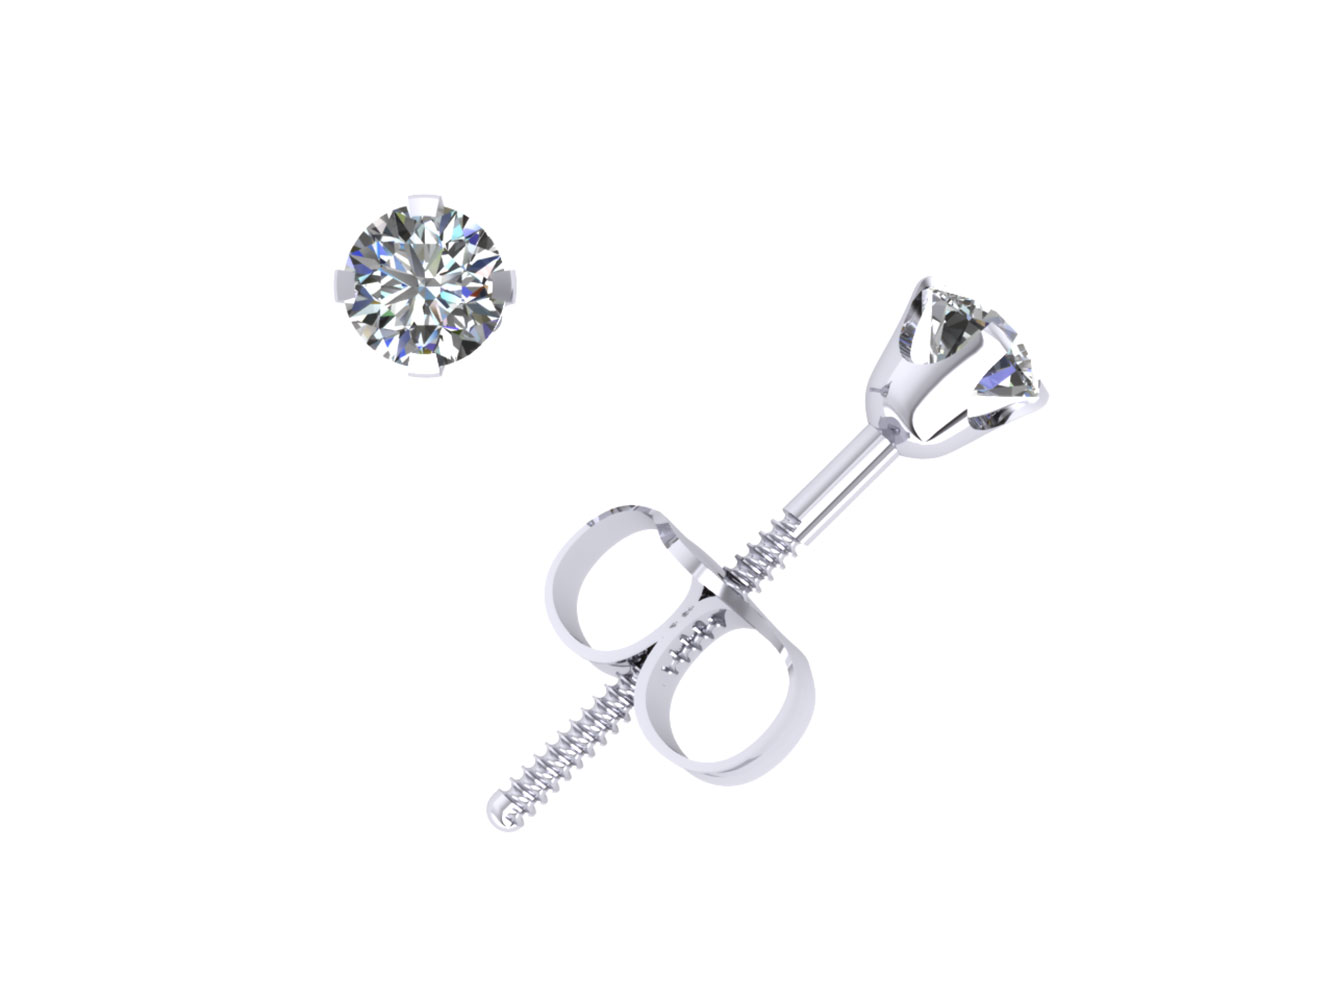 Jewel We Sell 0.15Ct Round Diamond Stud Earrings 14k White or Yellow Gold 4Prong Setting ScrewBack G SI1